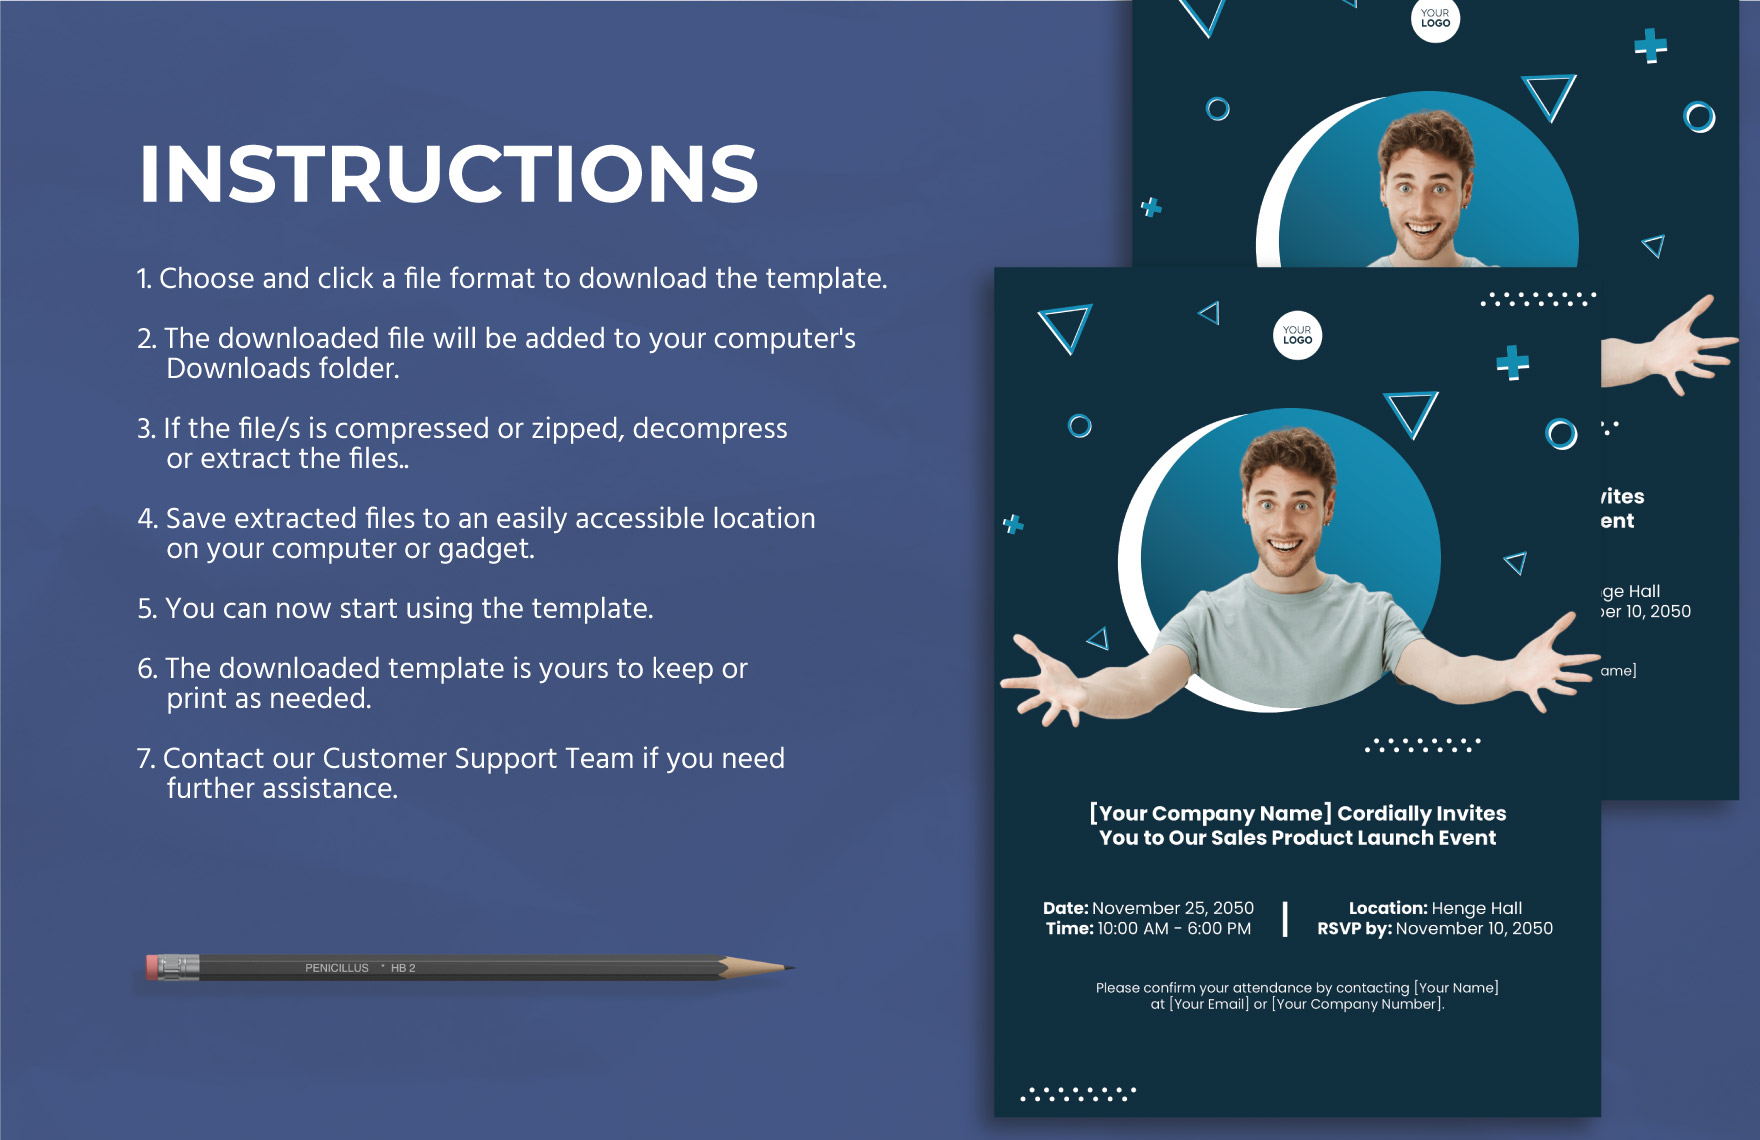 Sales Product Launch Invitation Card Template